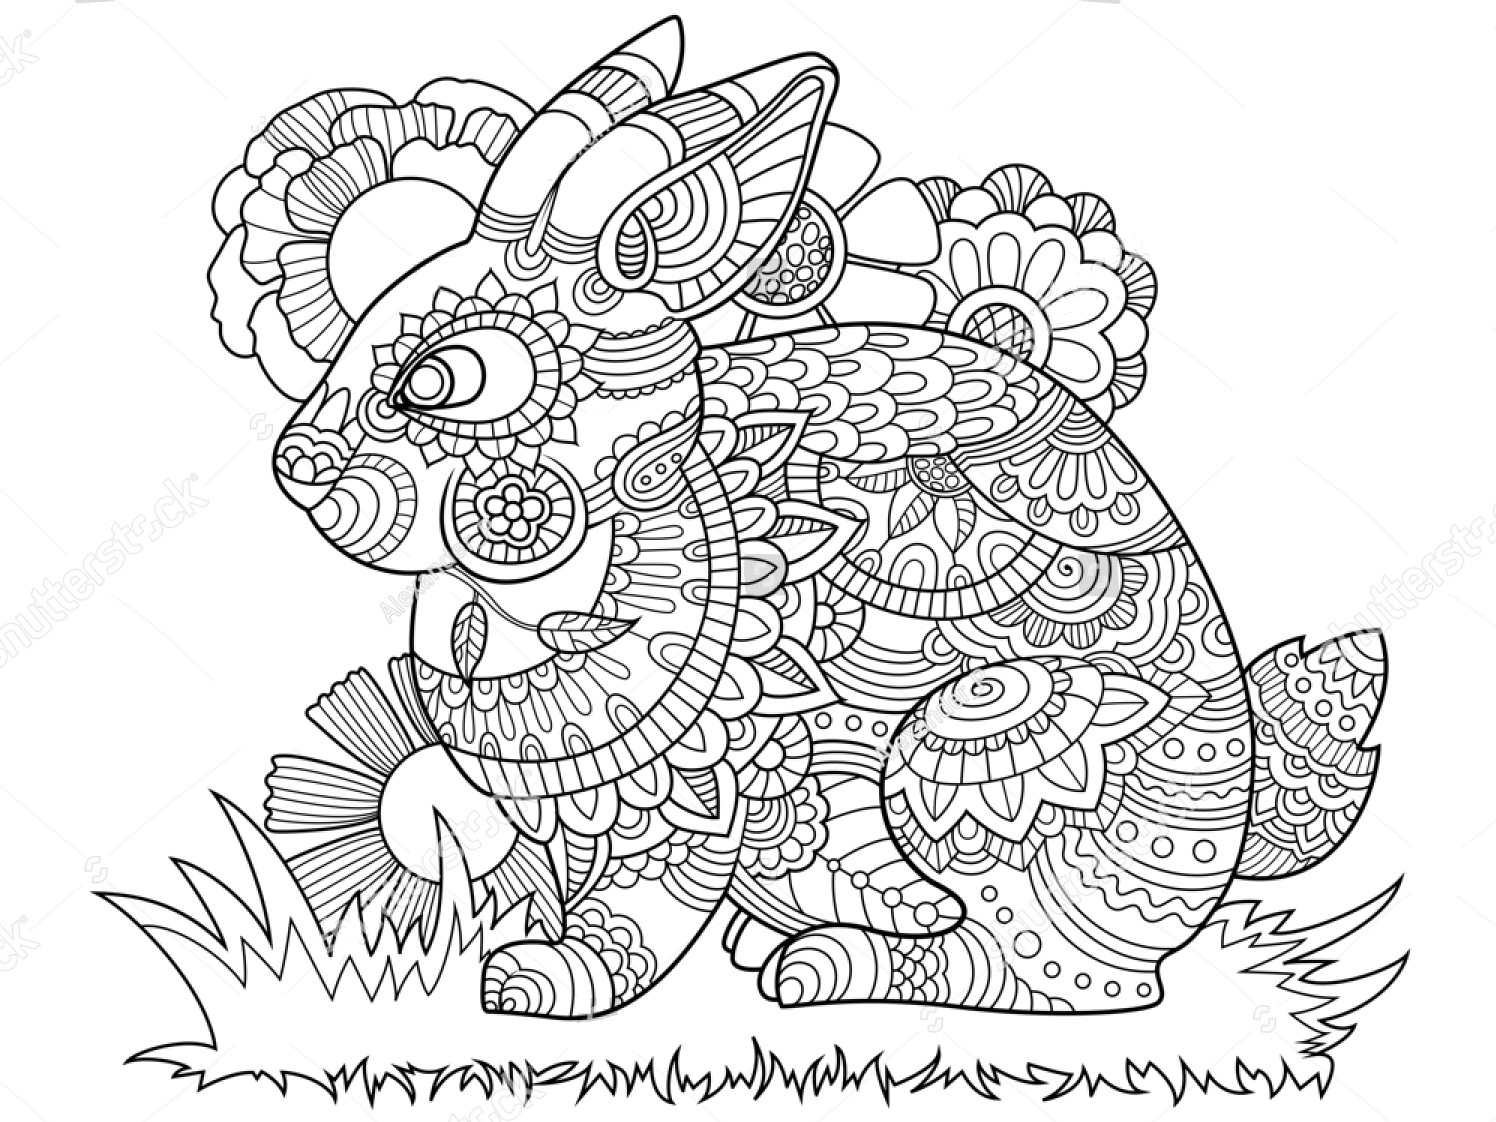 Rabbit coloring pages